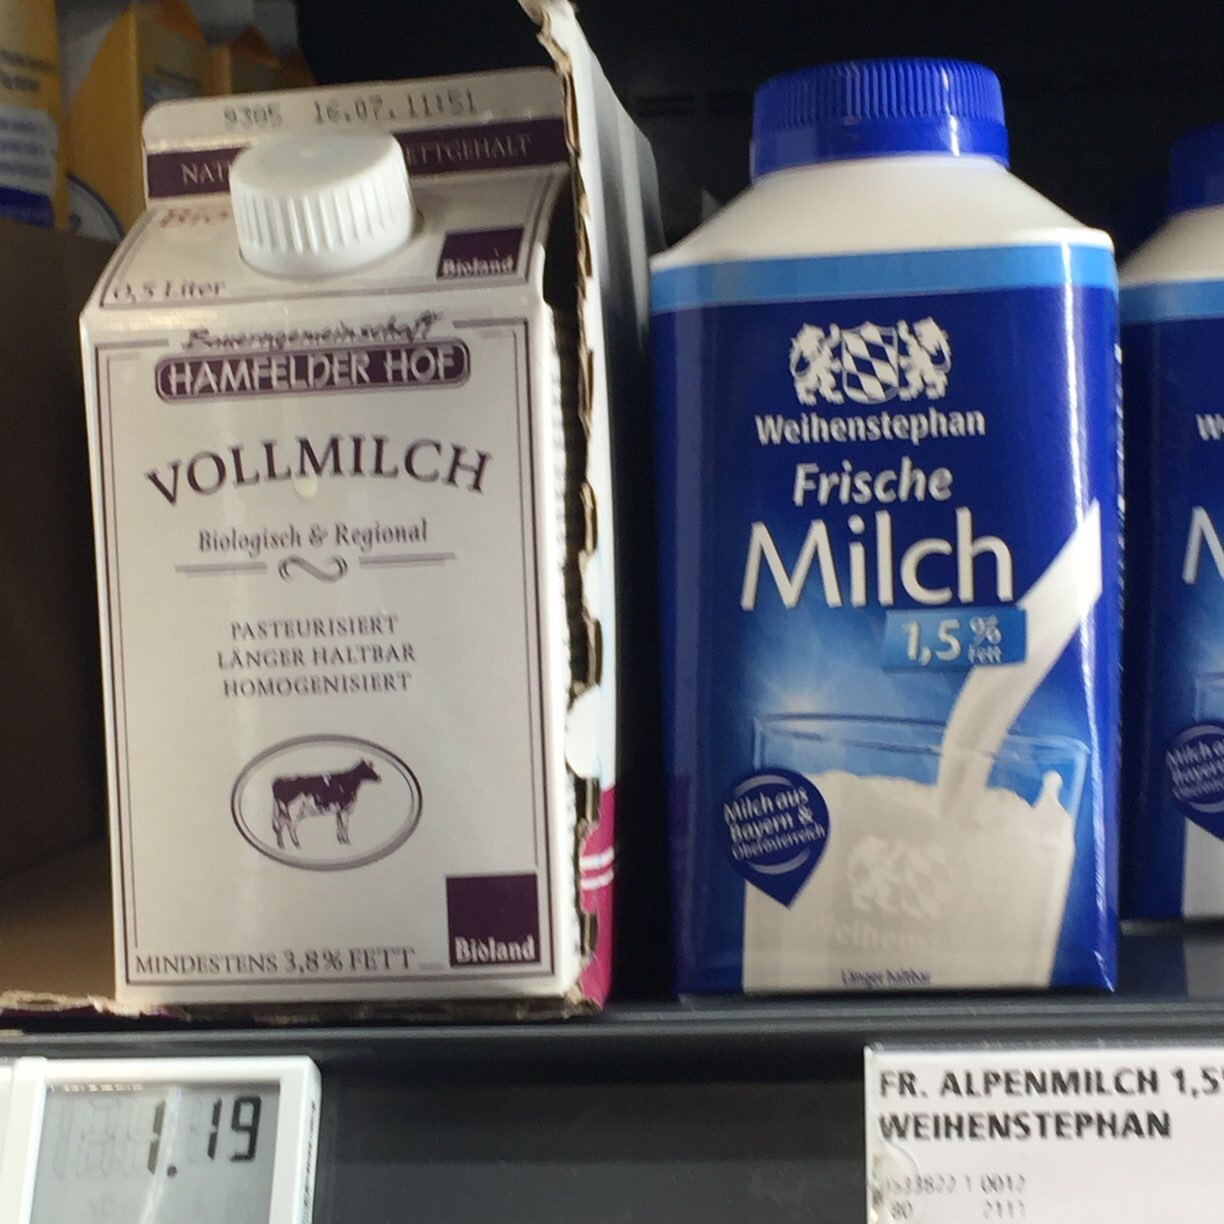 Milch